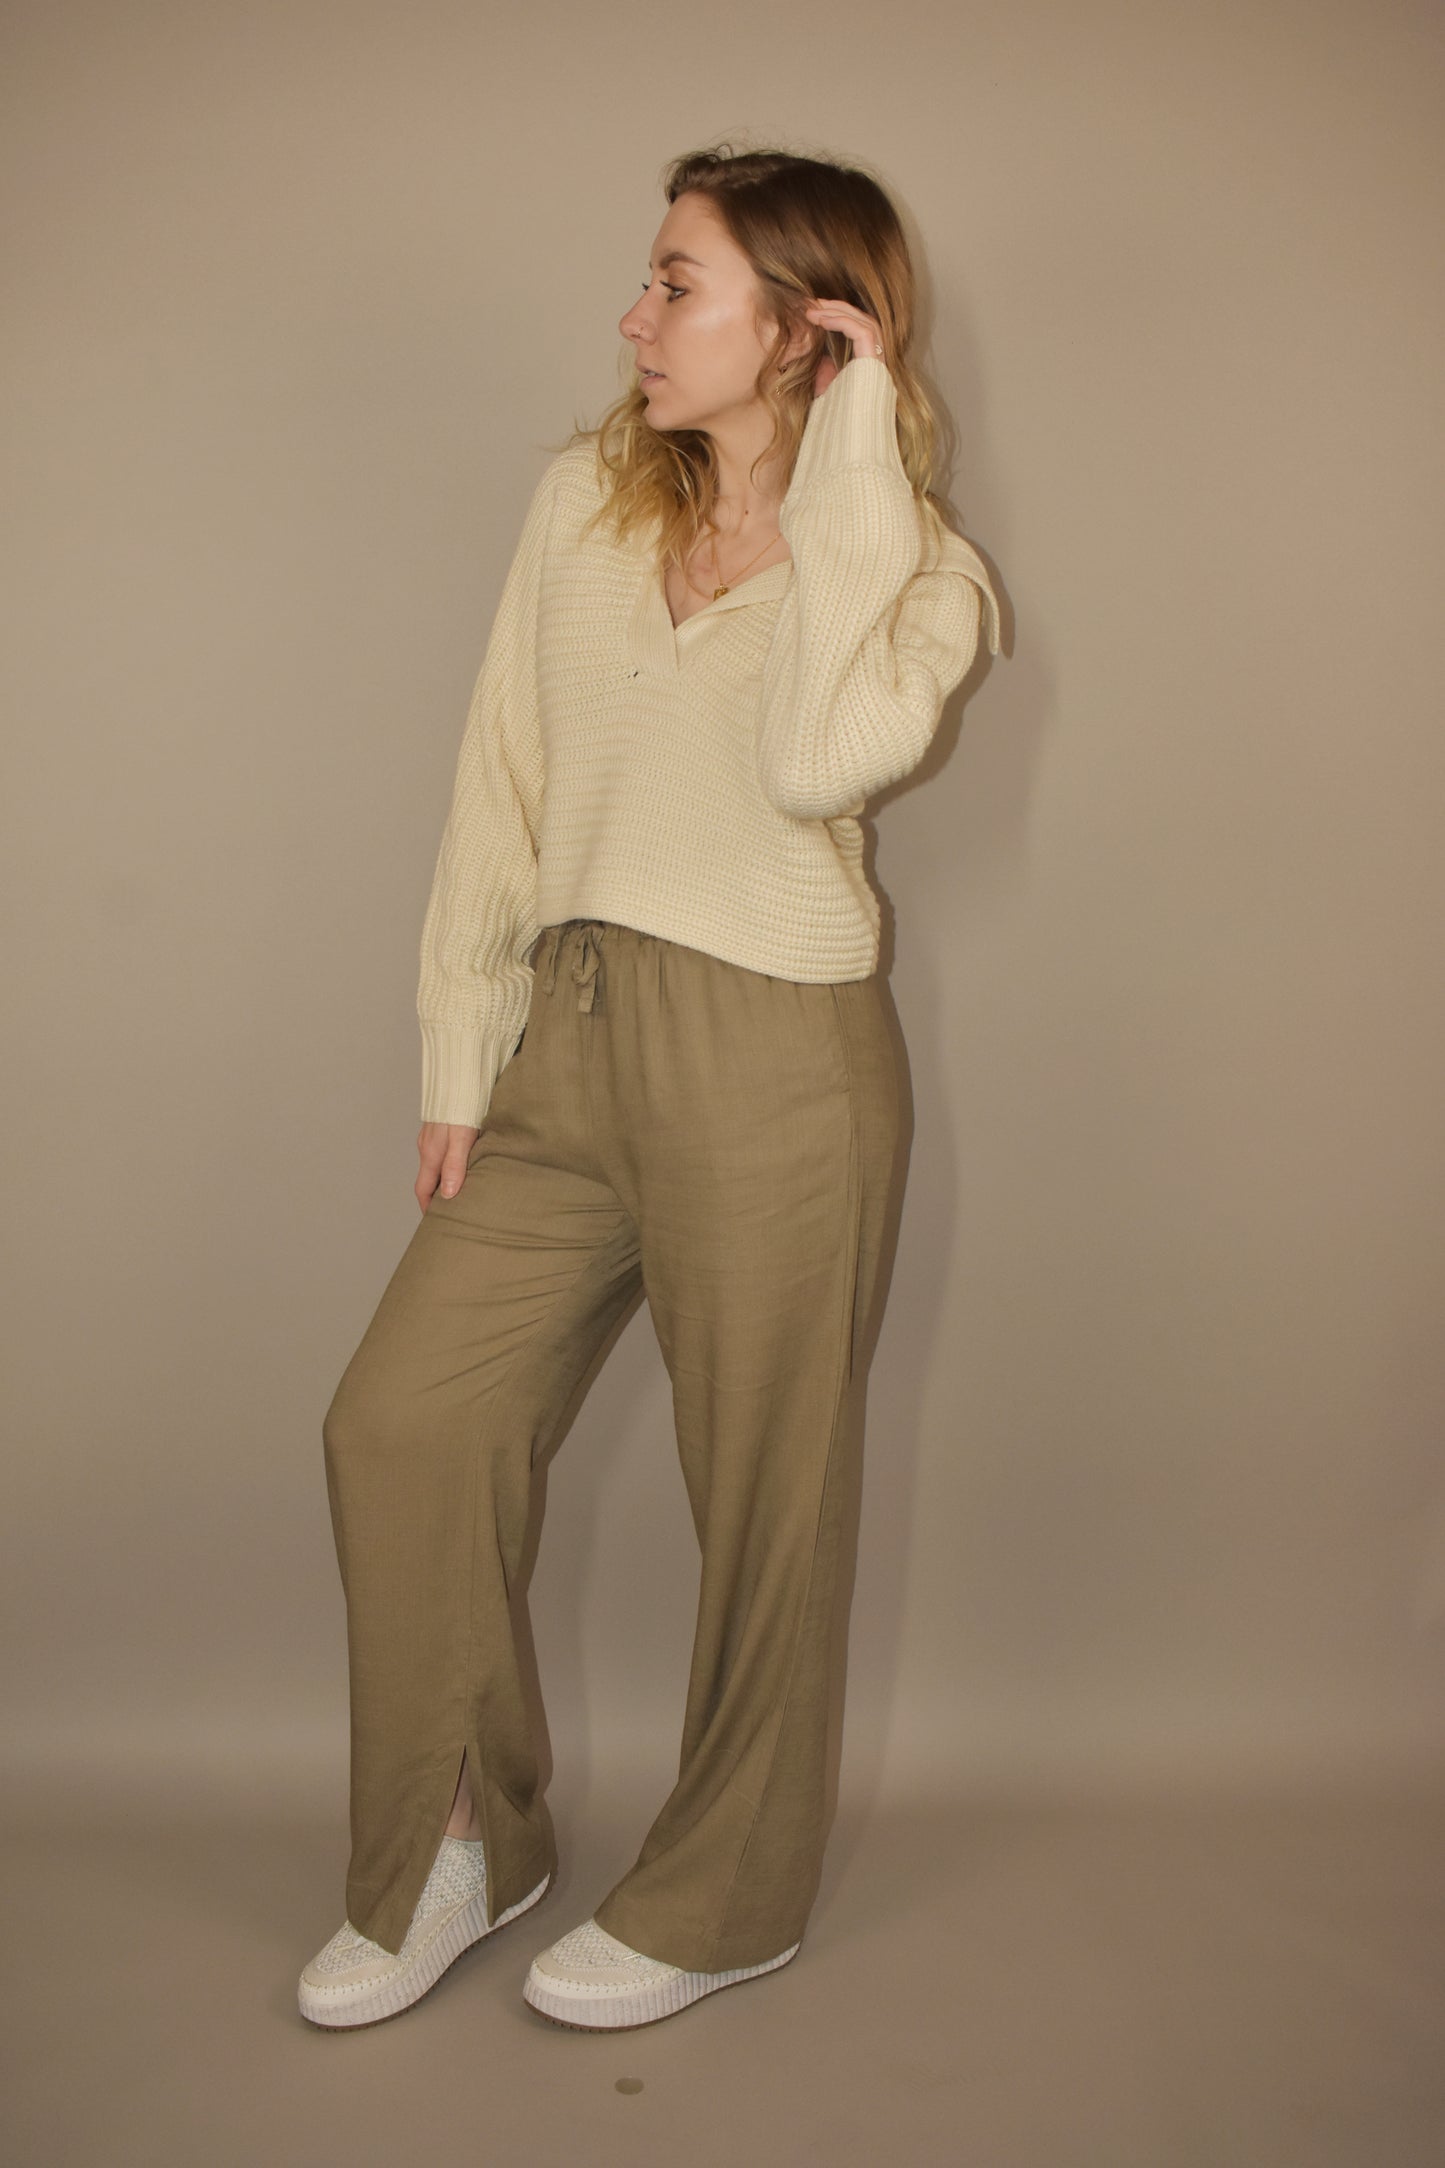 straight leg relaxed resort pants with a lettuce top with a drawstring, side pockets, shorts lining on the inside.